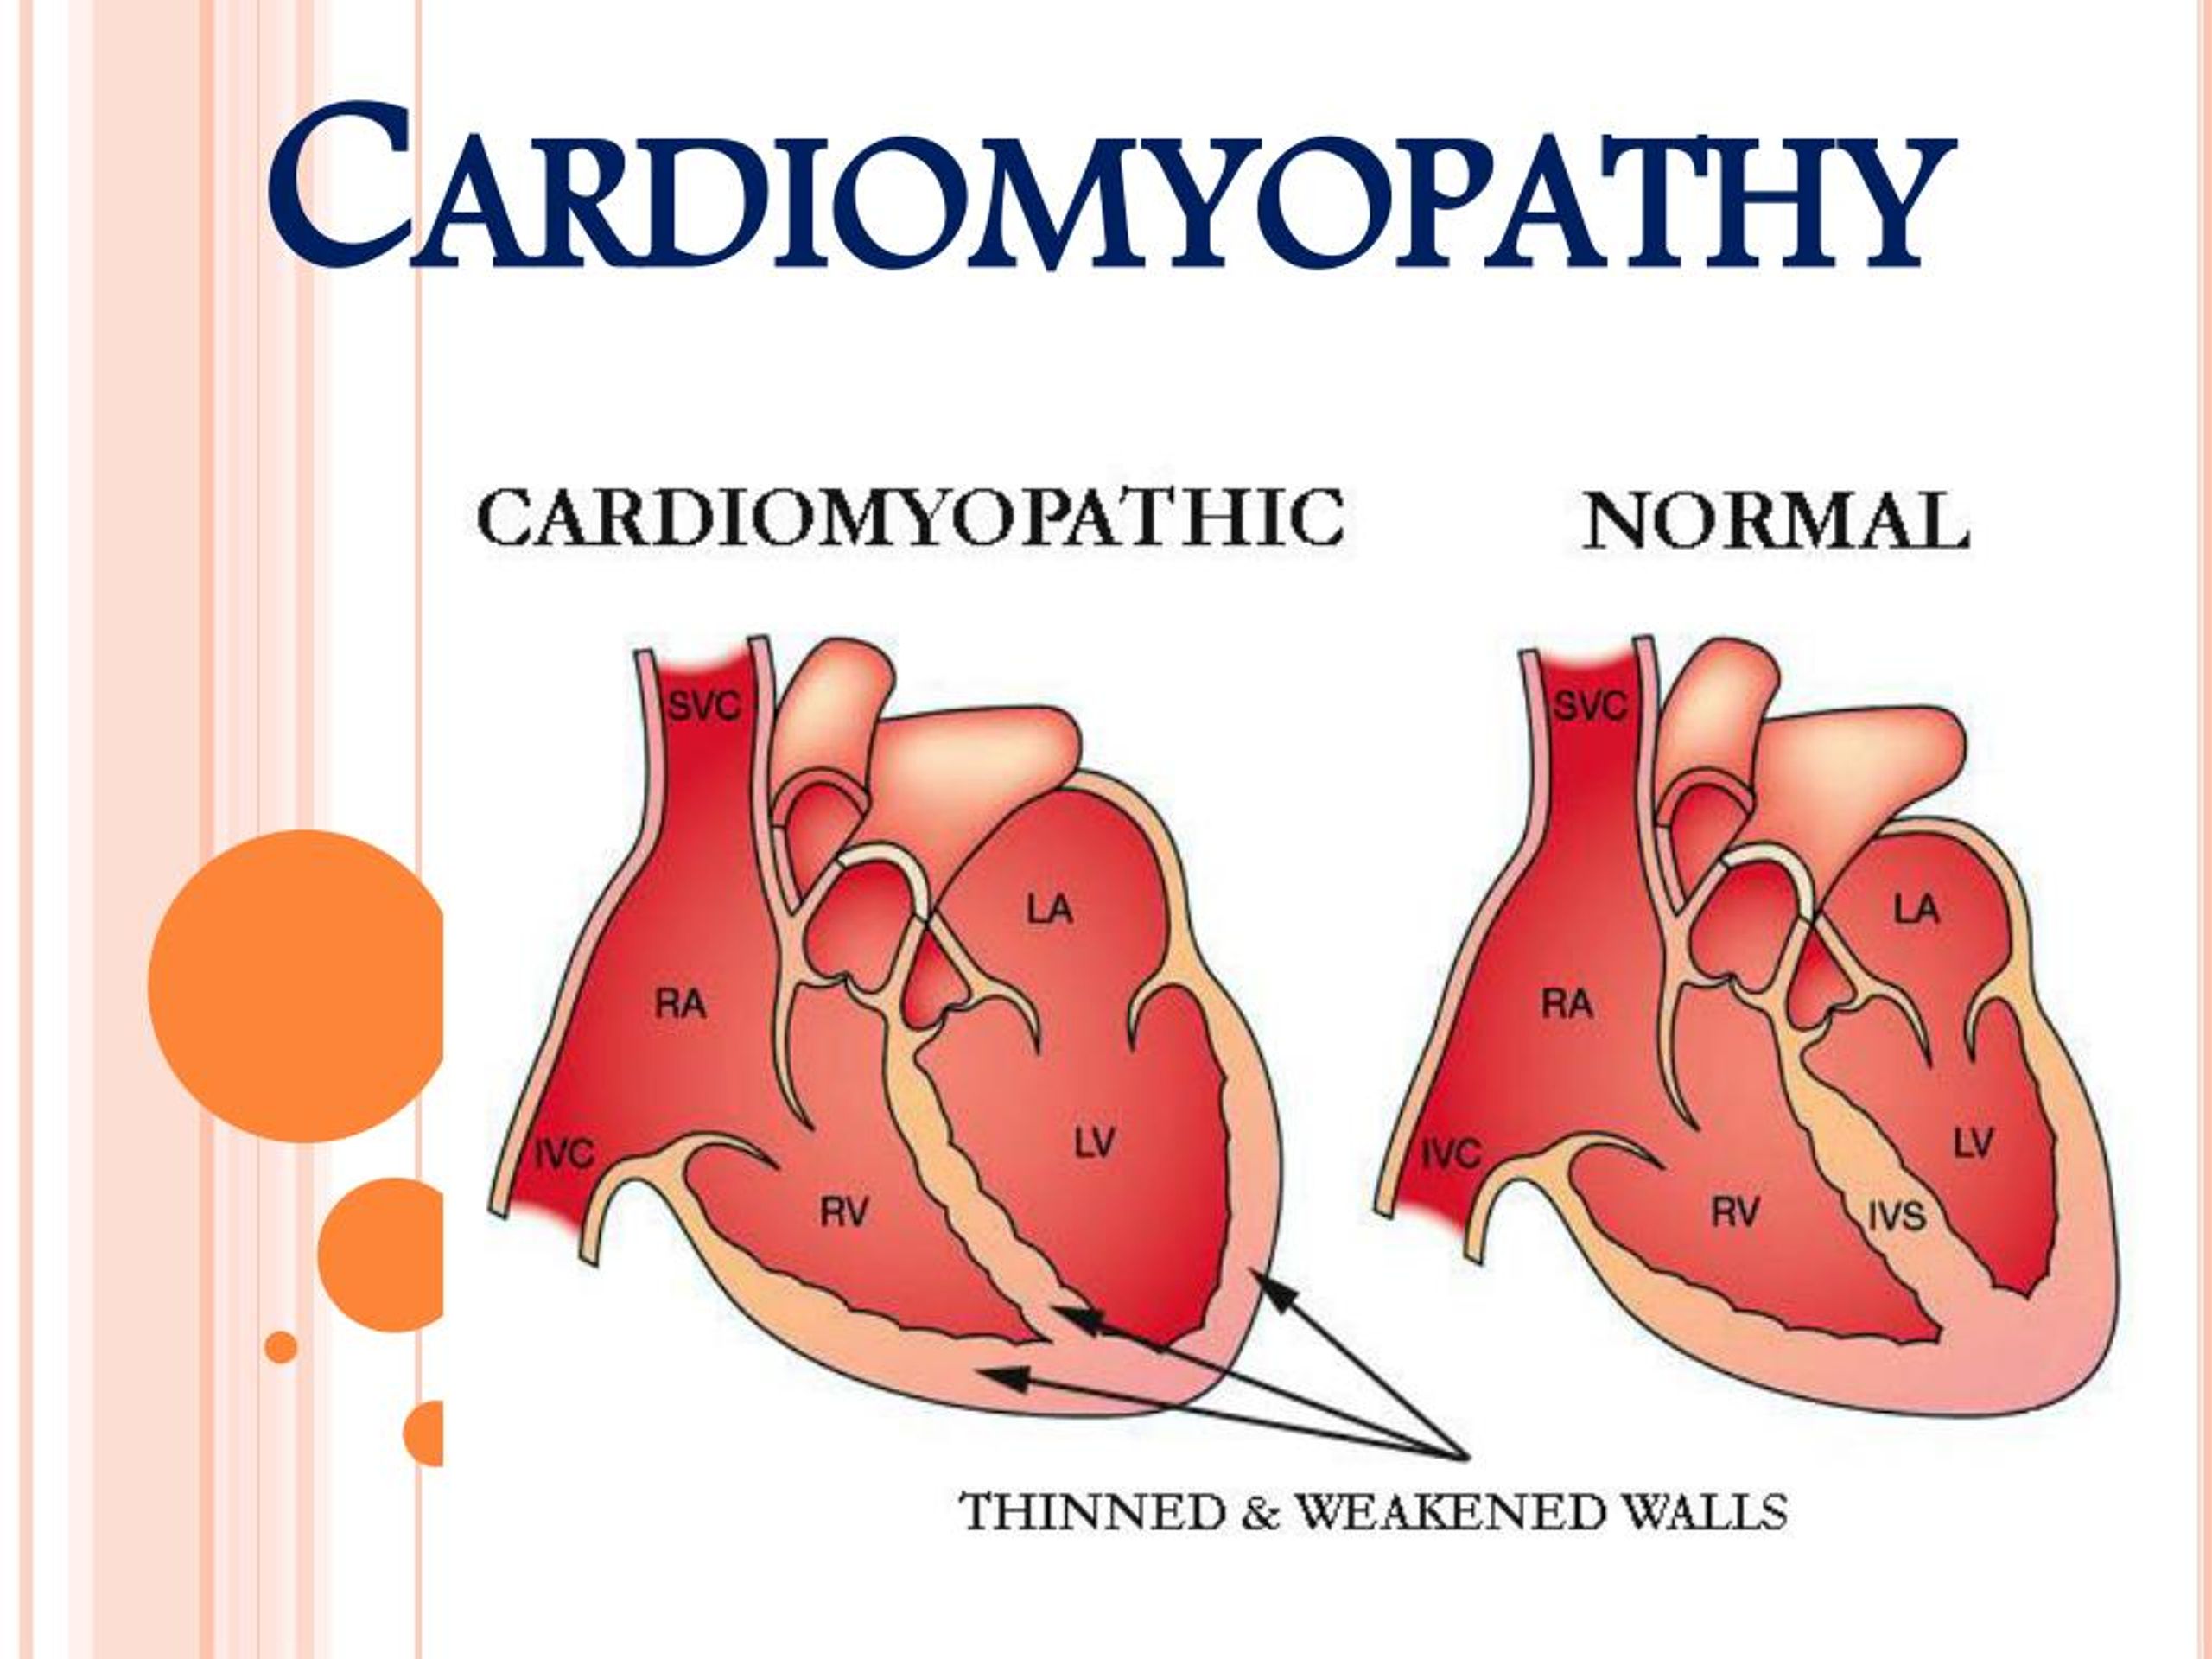 PPT - Heart Muscle Disease (Cardiomyopathy) PowerPoint ...
